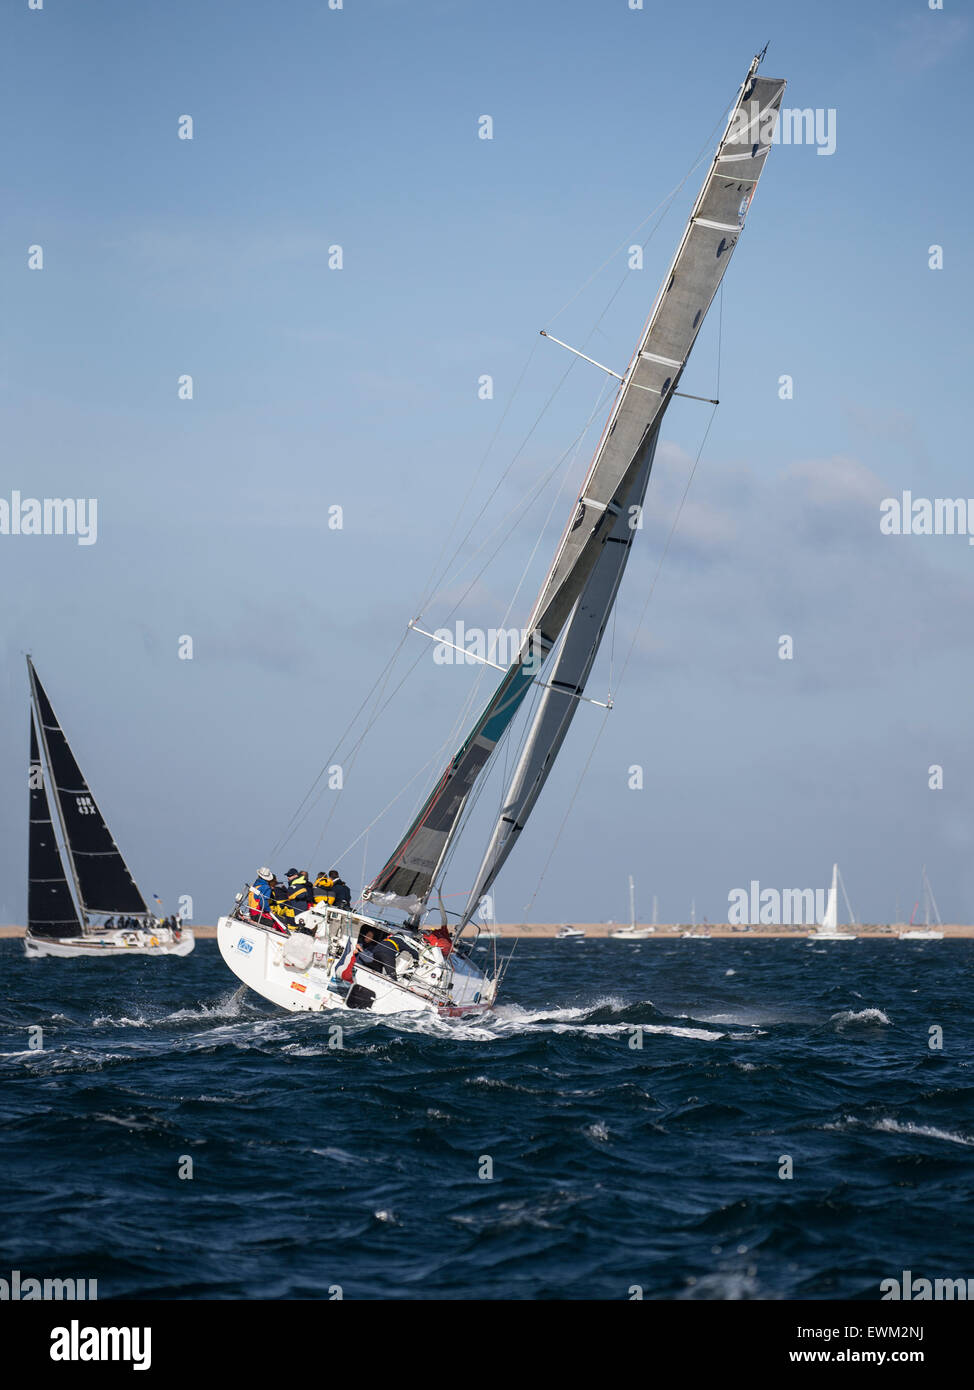 UK. 27th June, 2015. Gibsea 96 'Les Arcs' taking part in the 2015 Round the Island Yacht Race Credit:  Niall Ferguson/Alamy Live News Stock Photo